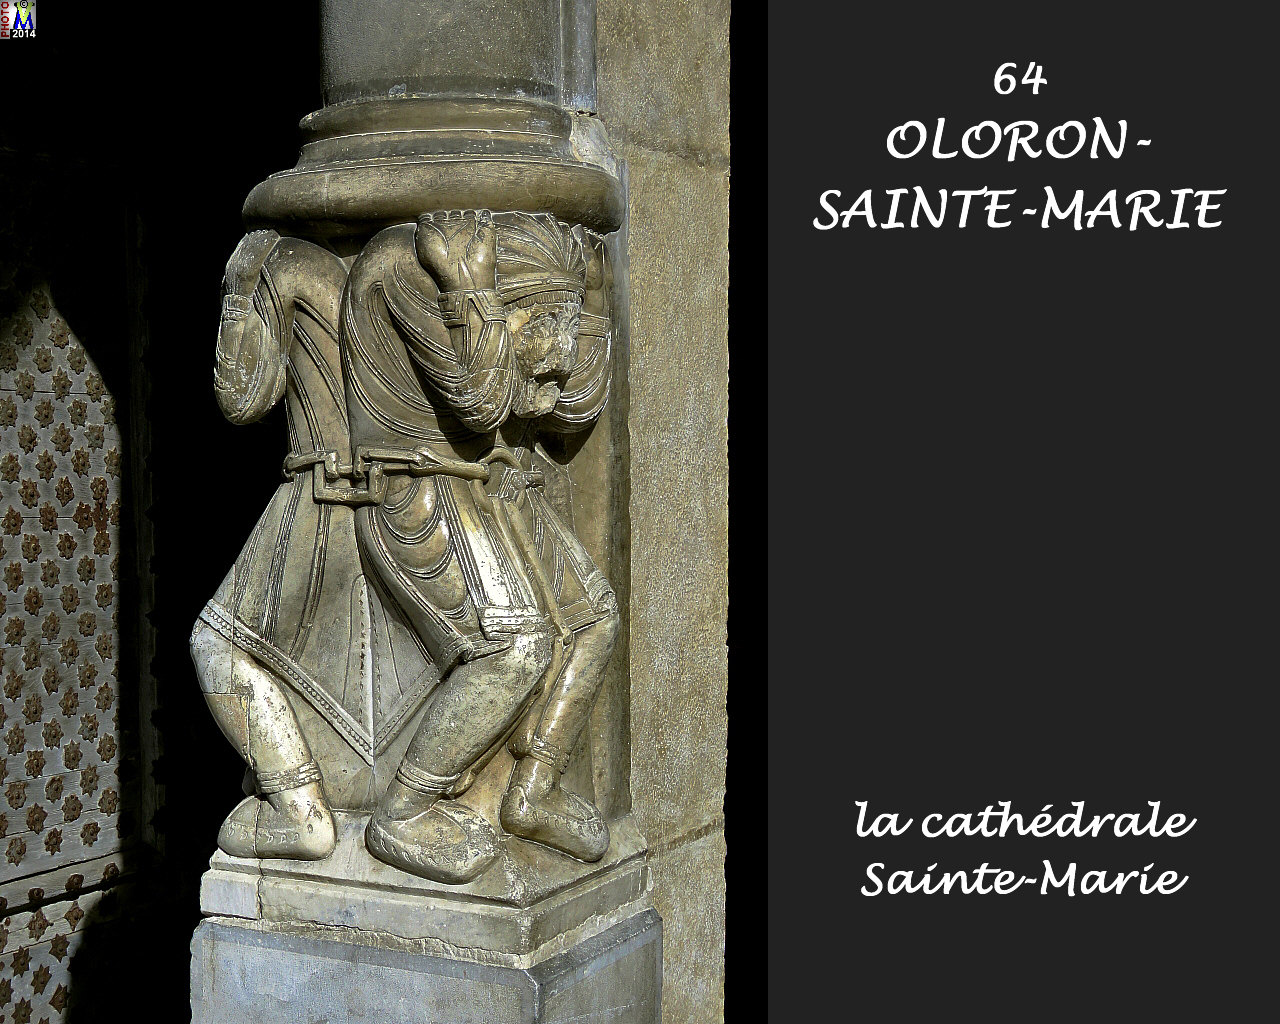 64OLORON-STE-MARIE_cathedrale_156.jpg